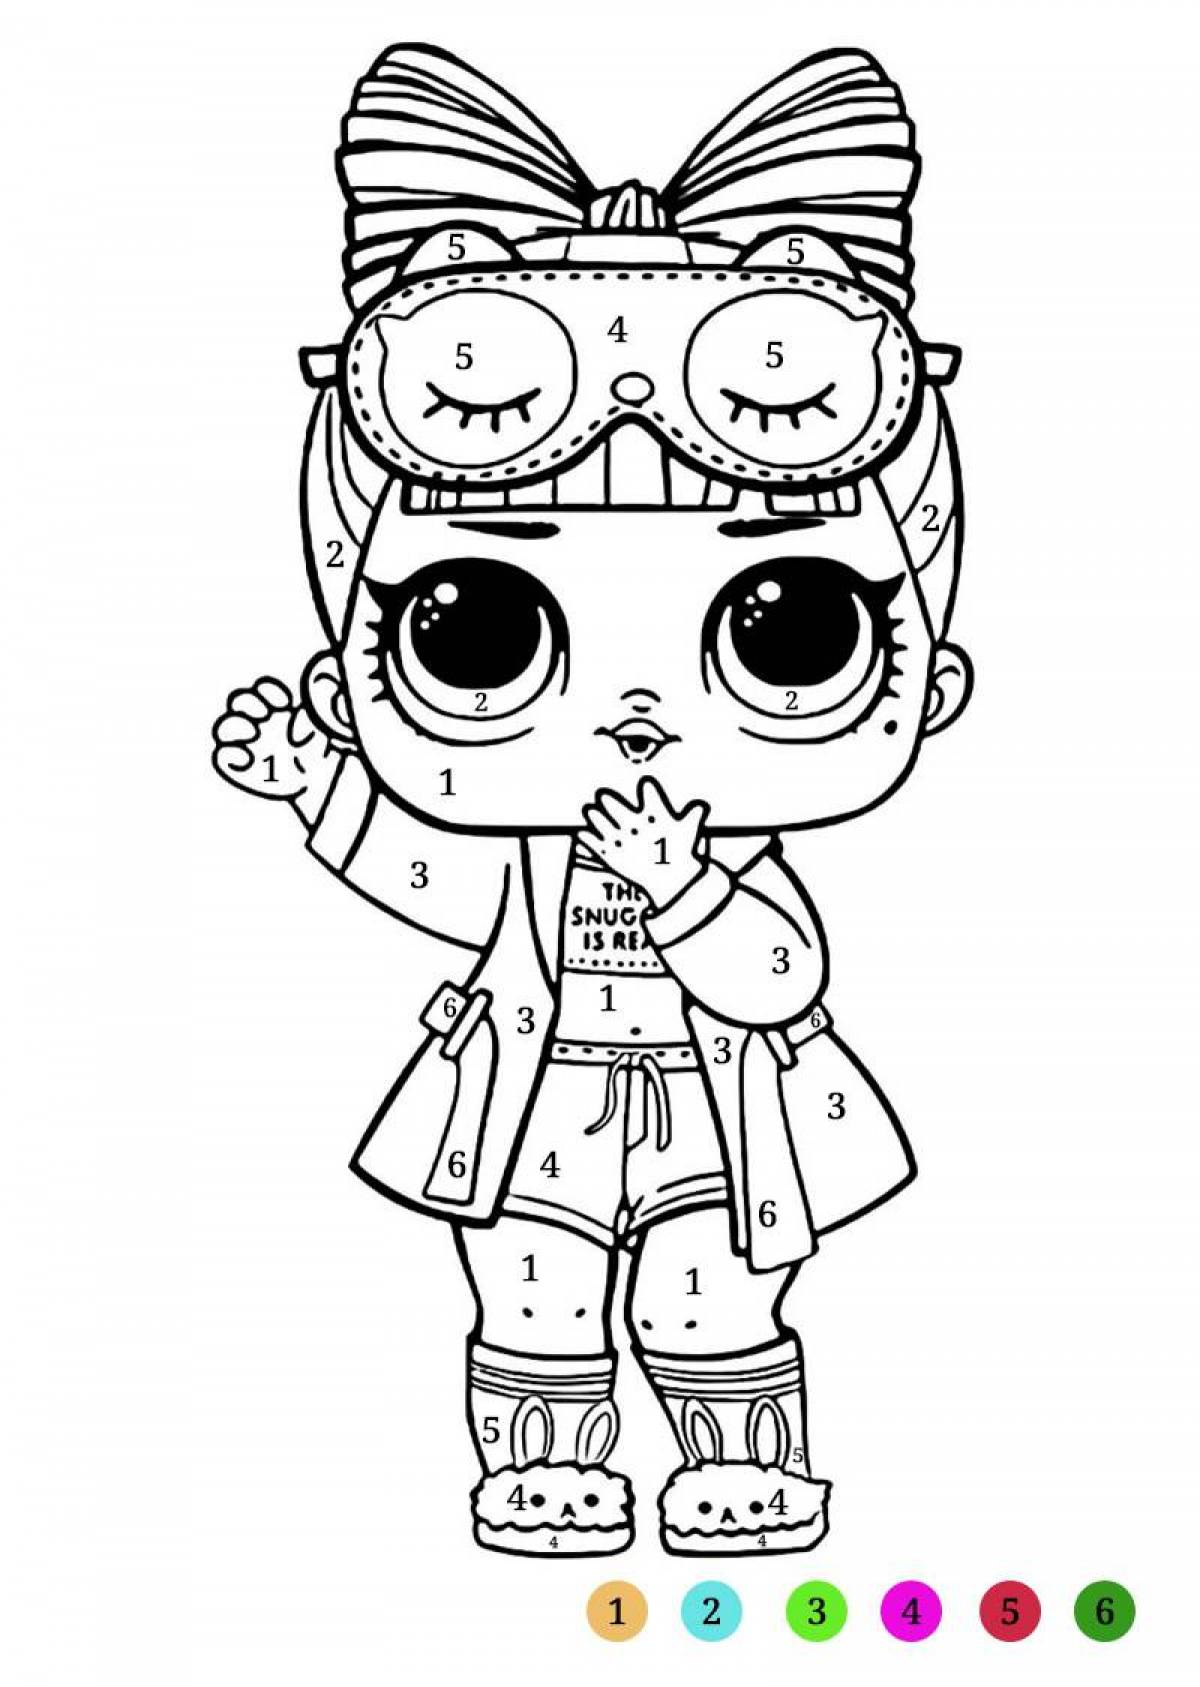 Incredible lol dolls coloring pages